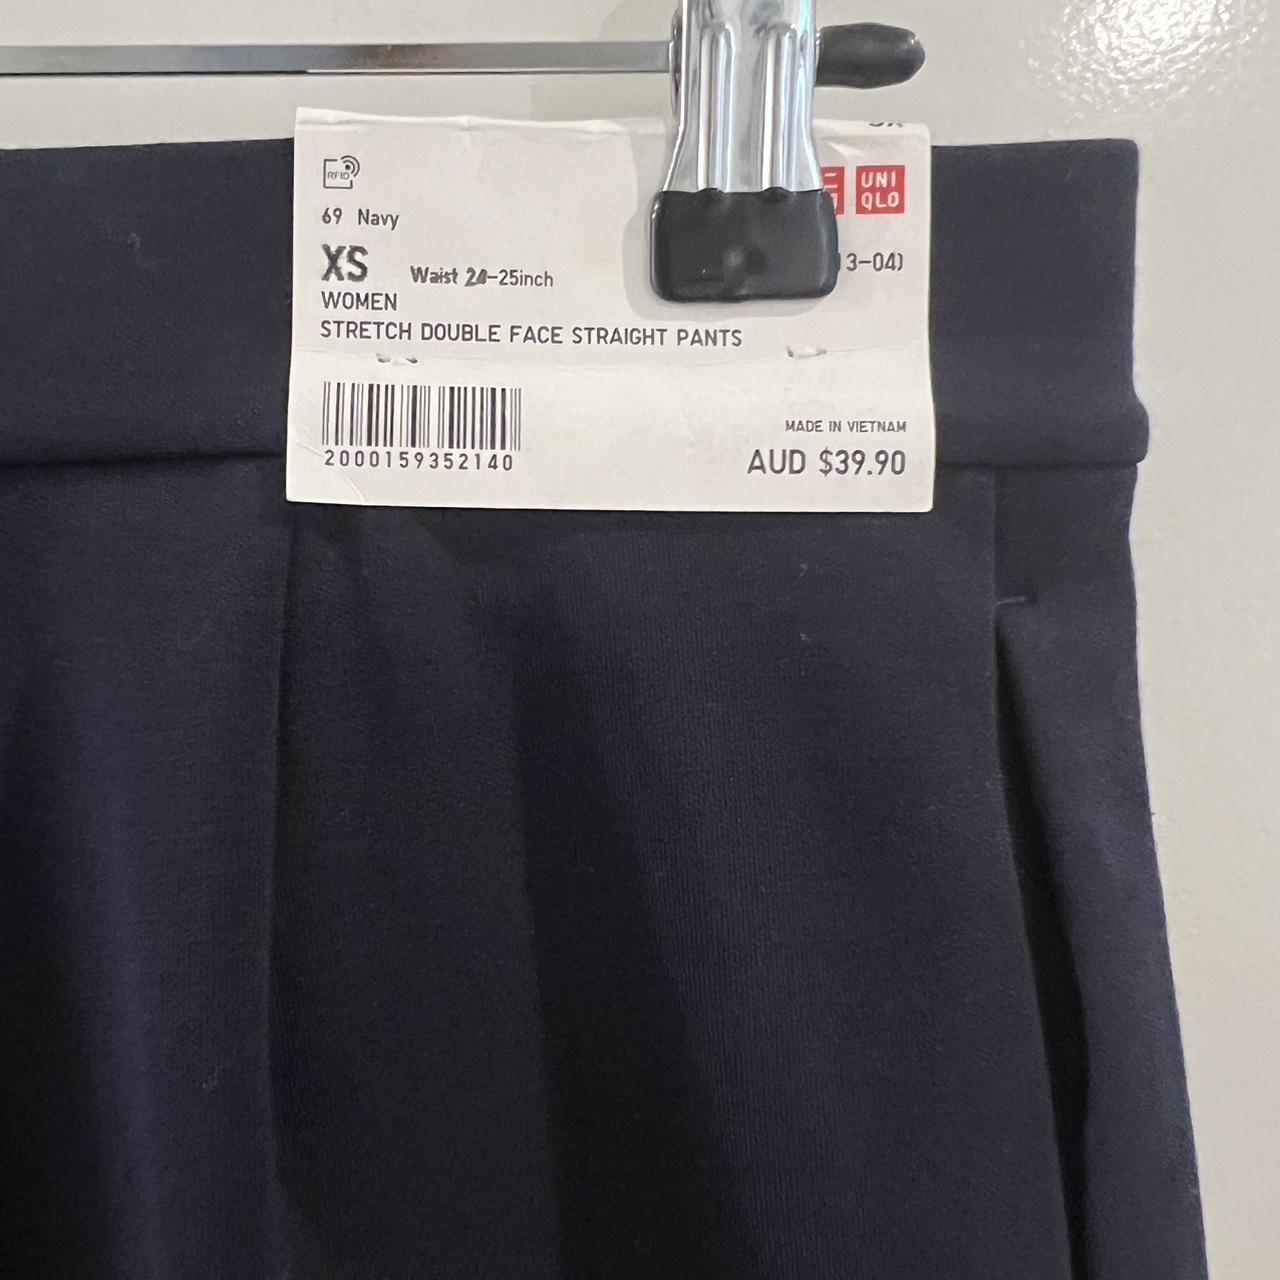 Uniqlo Stretch Double Face Straight Pants navy size XS - Depop